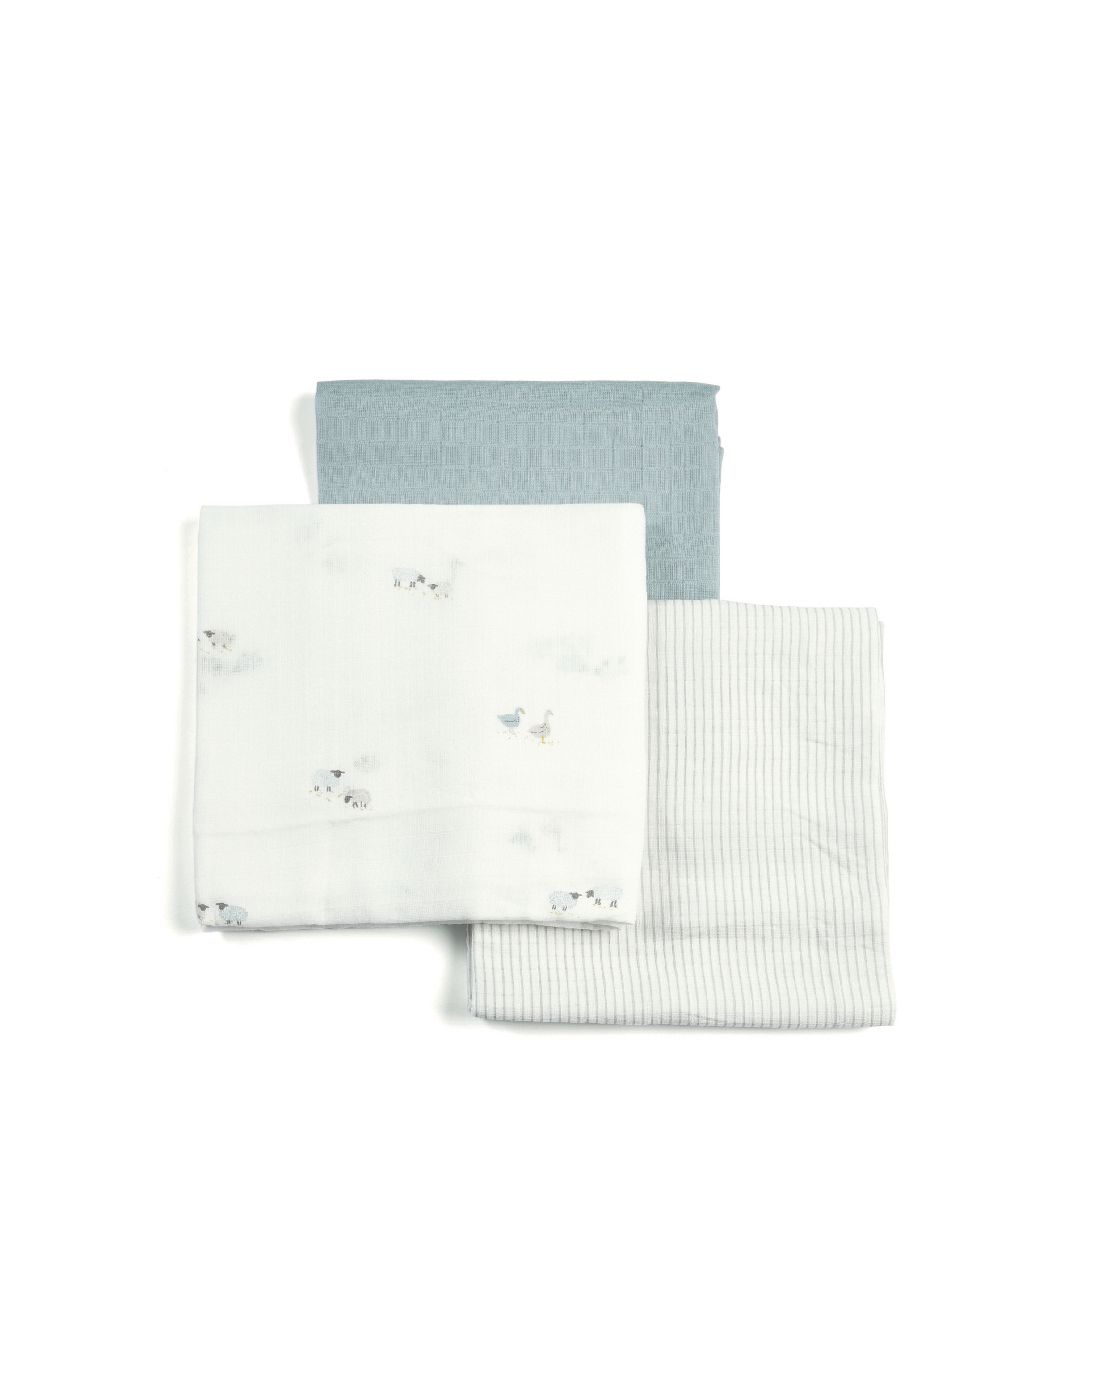 Mamas & Papas 3 Pack of Muslin Squares Welcome To The World Boy